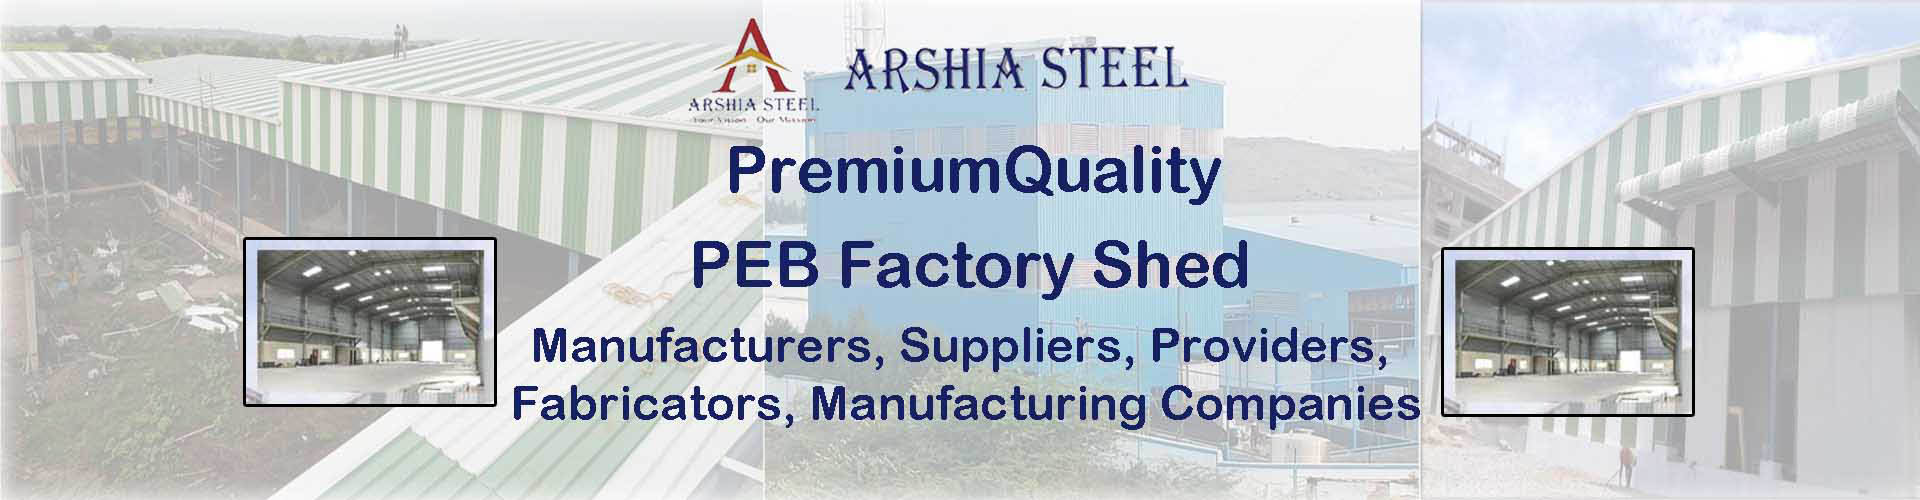 PEB Factory Shed